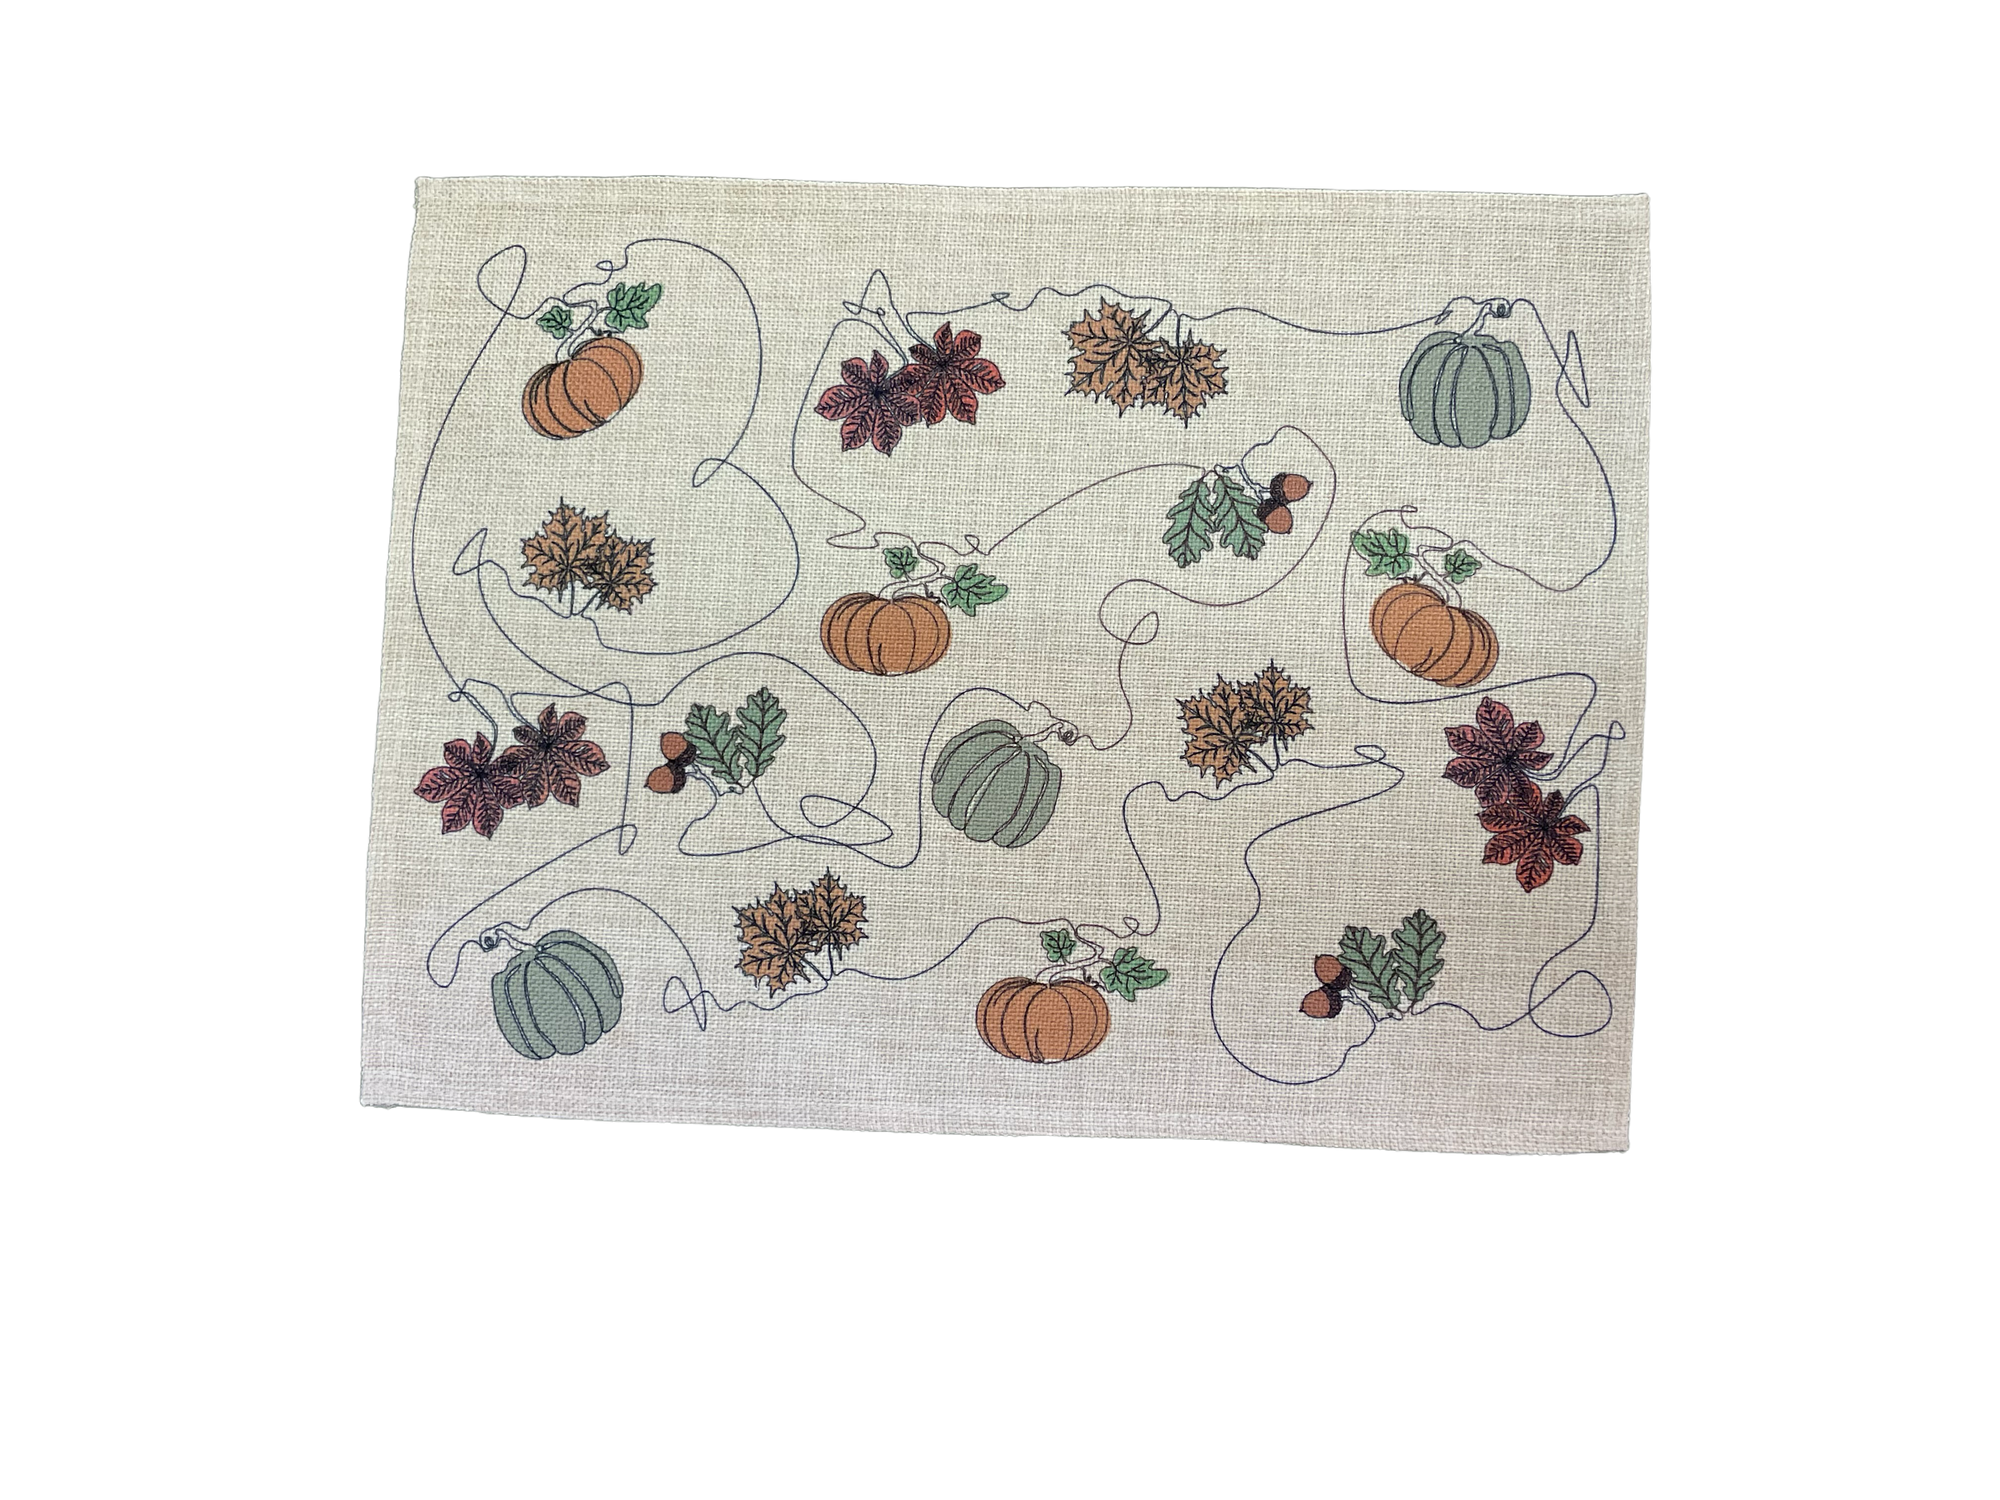 Ink and Hue Autumn Placemats (Set of Four)